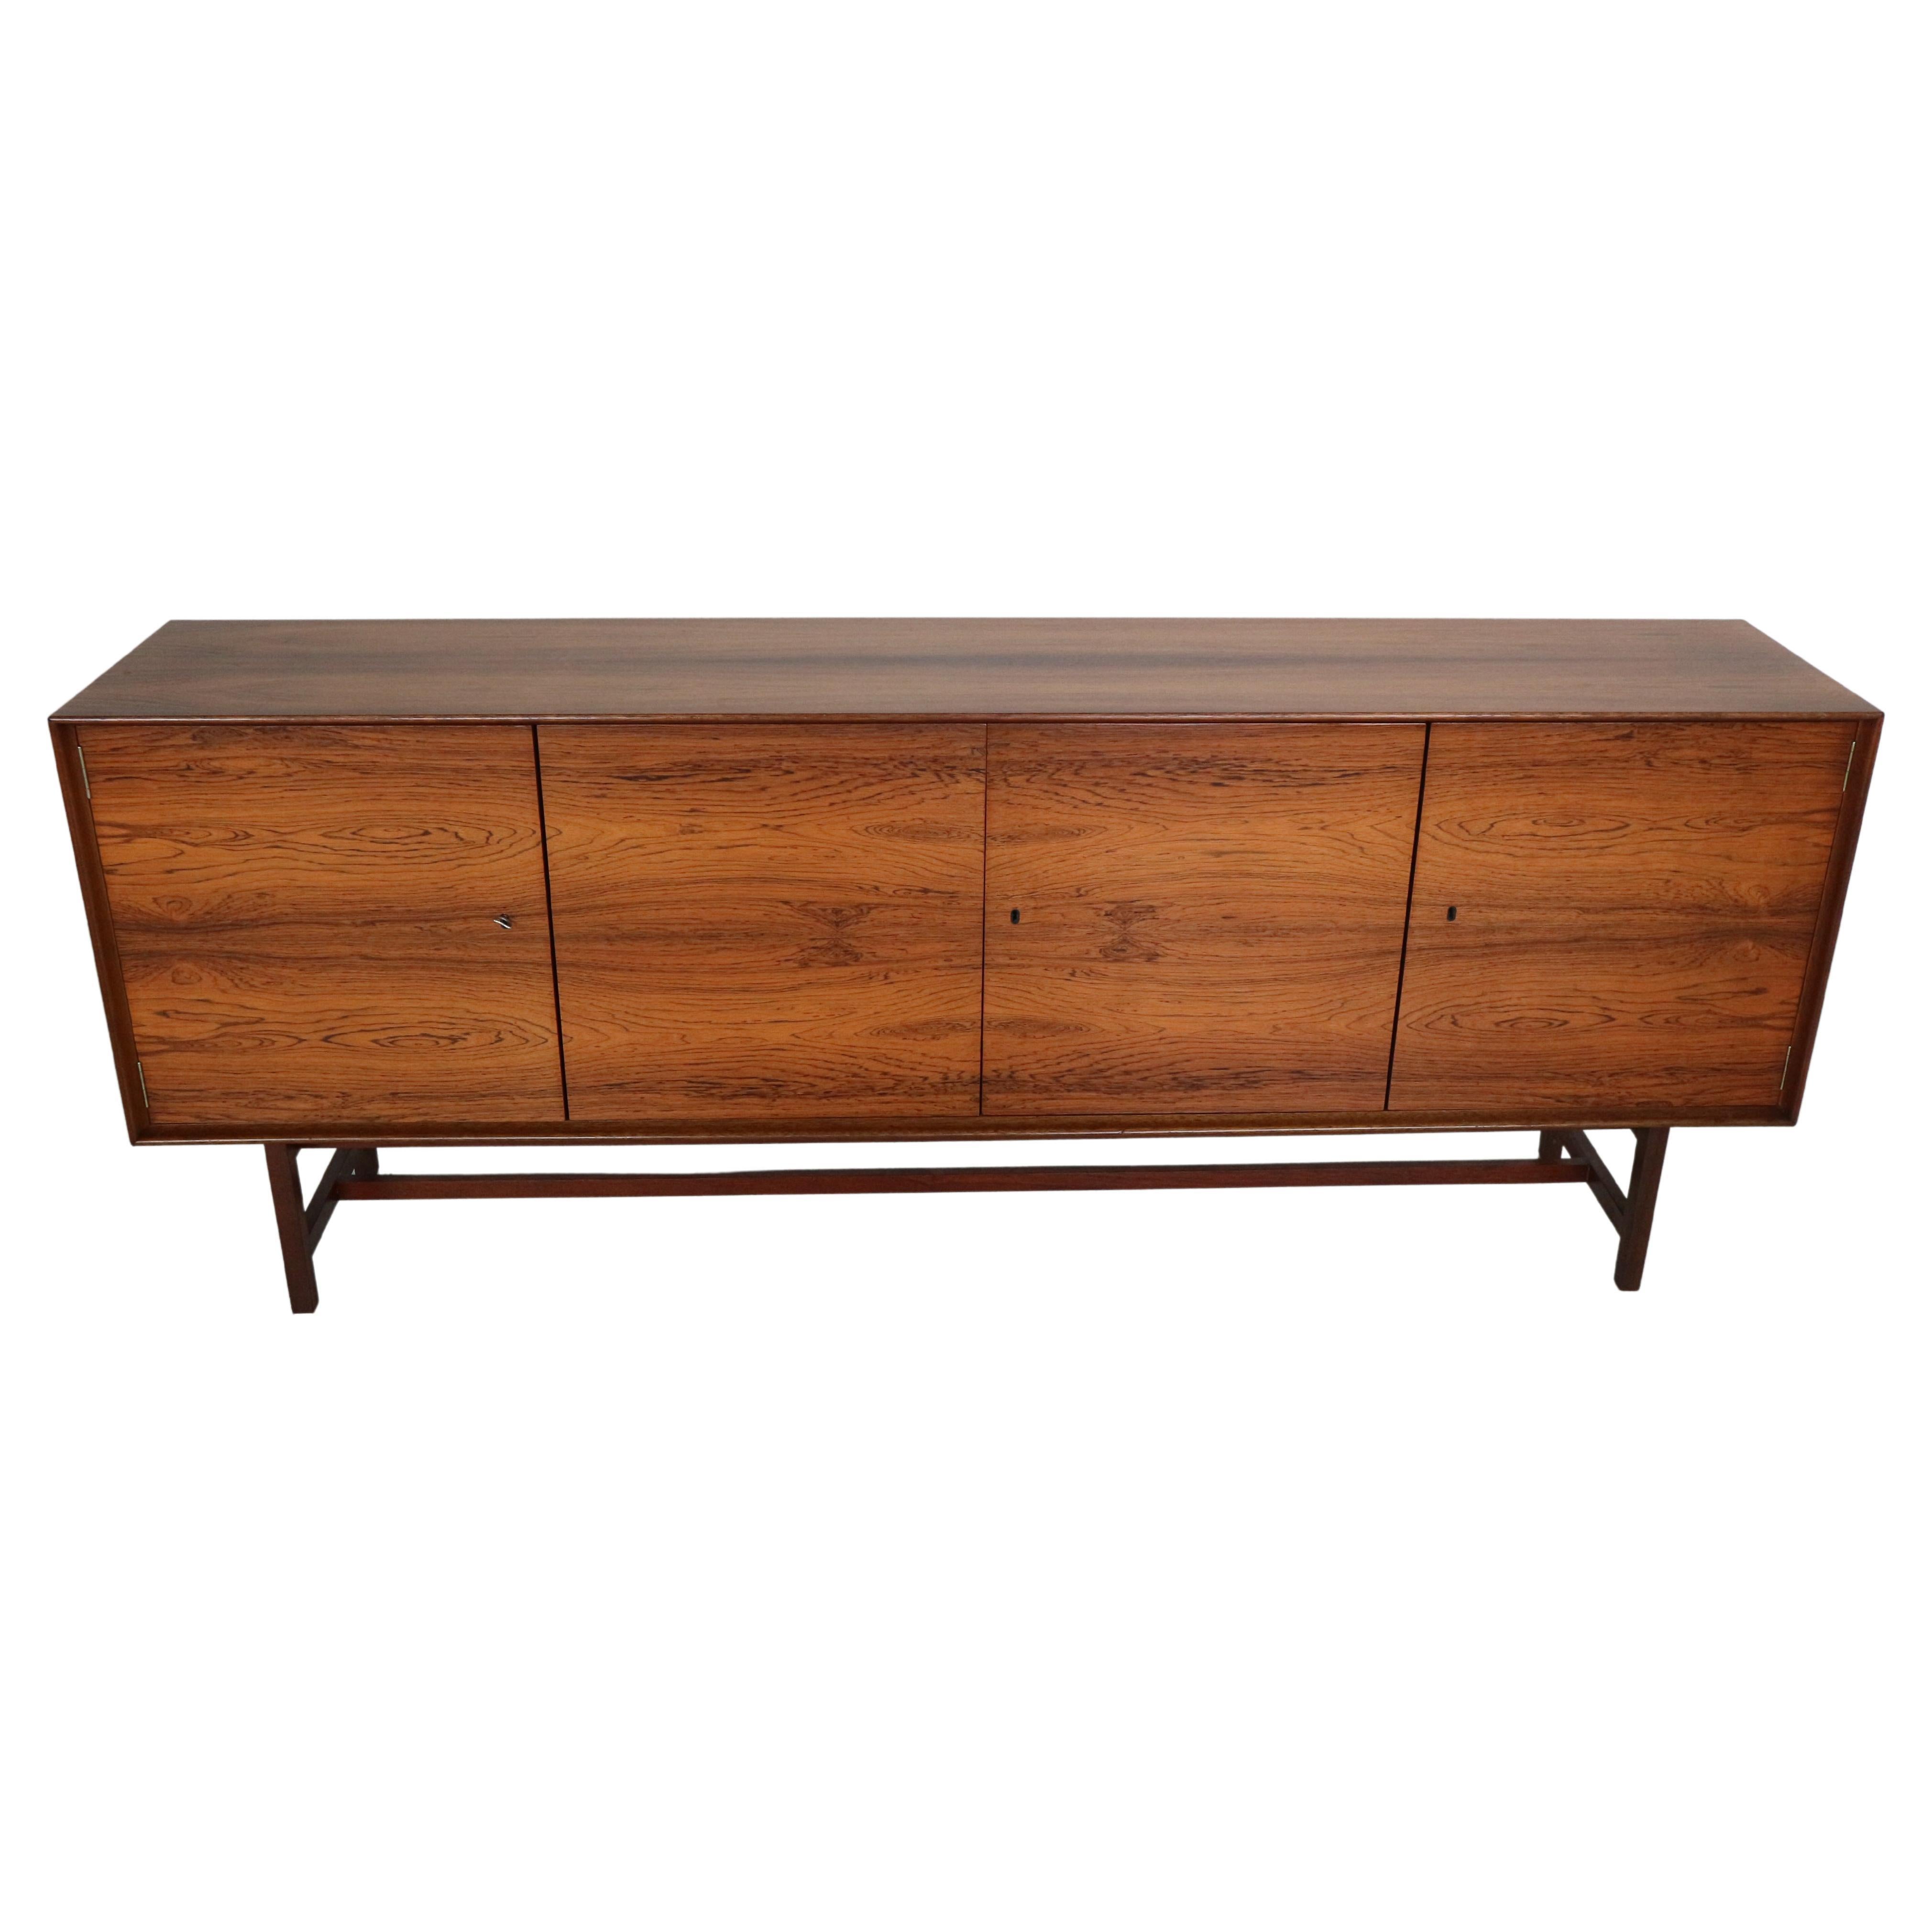 Scandinavian Modern period sideboard produced in 1960's Denmark. 
Four hidden oak drawers on the side and three doors from both sides.
Four shelves.
The patterns of the wood is very beautiful.
Rounded corners.
Solid frame and feet.
All the